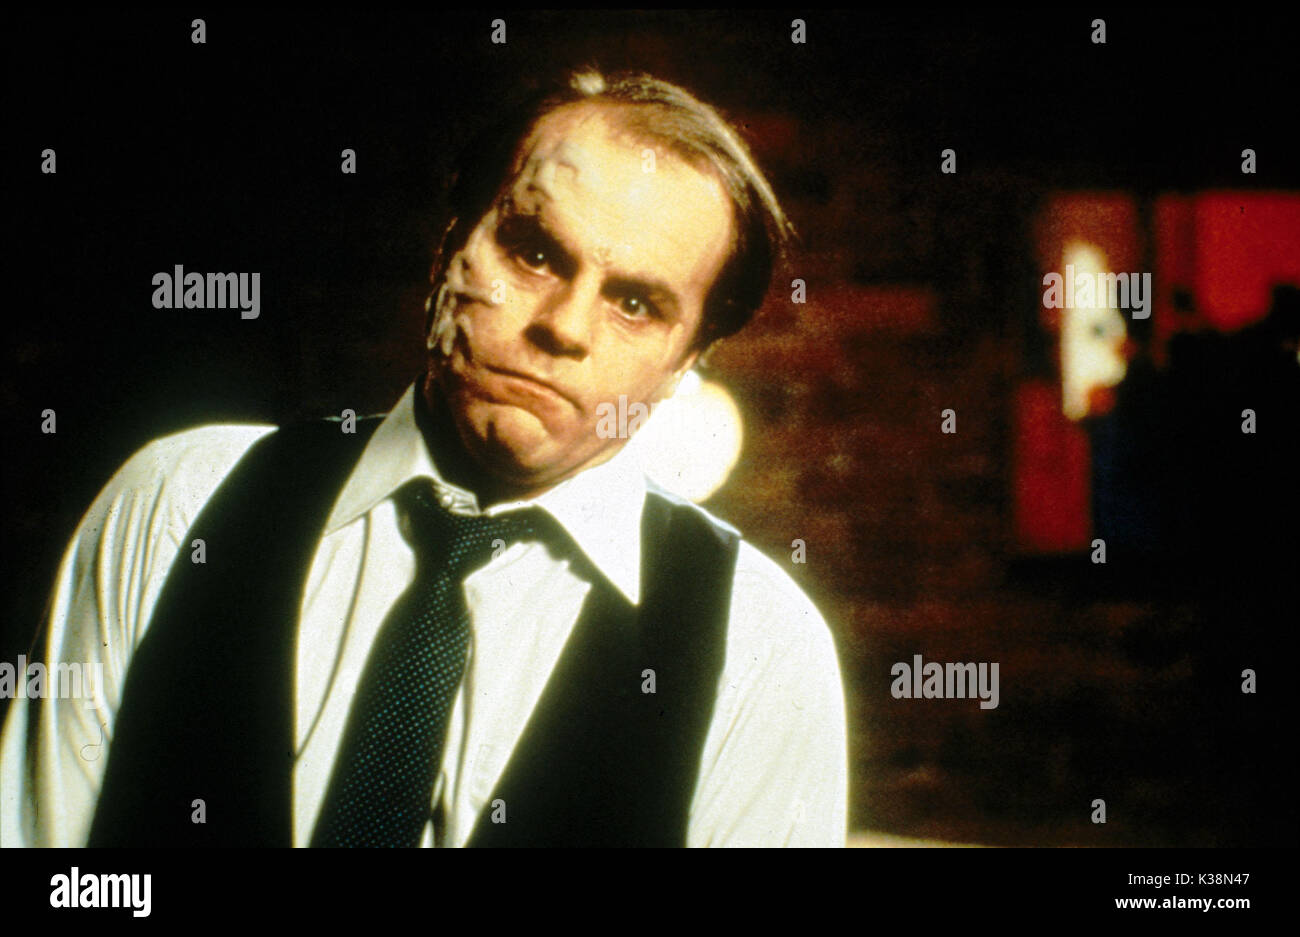 Scanners Official Trailer #1 - Michael Ironside Movie (1981) HD